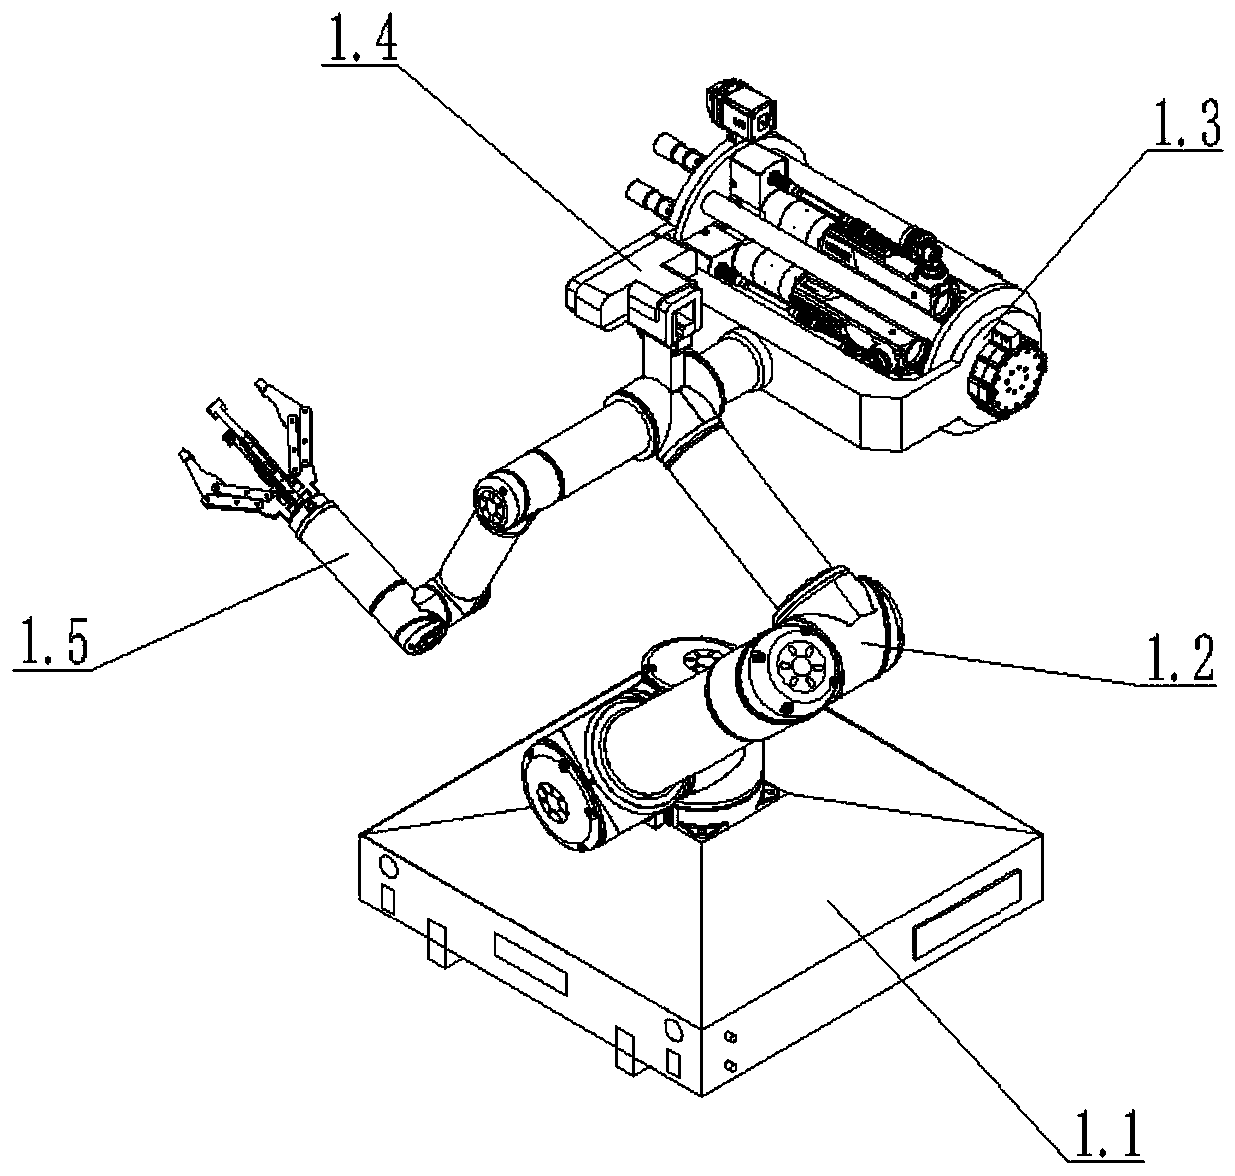 Intelligent assembly system and method based on six-degree-of-freedom robot